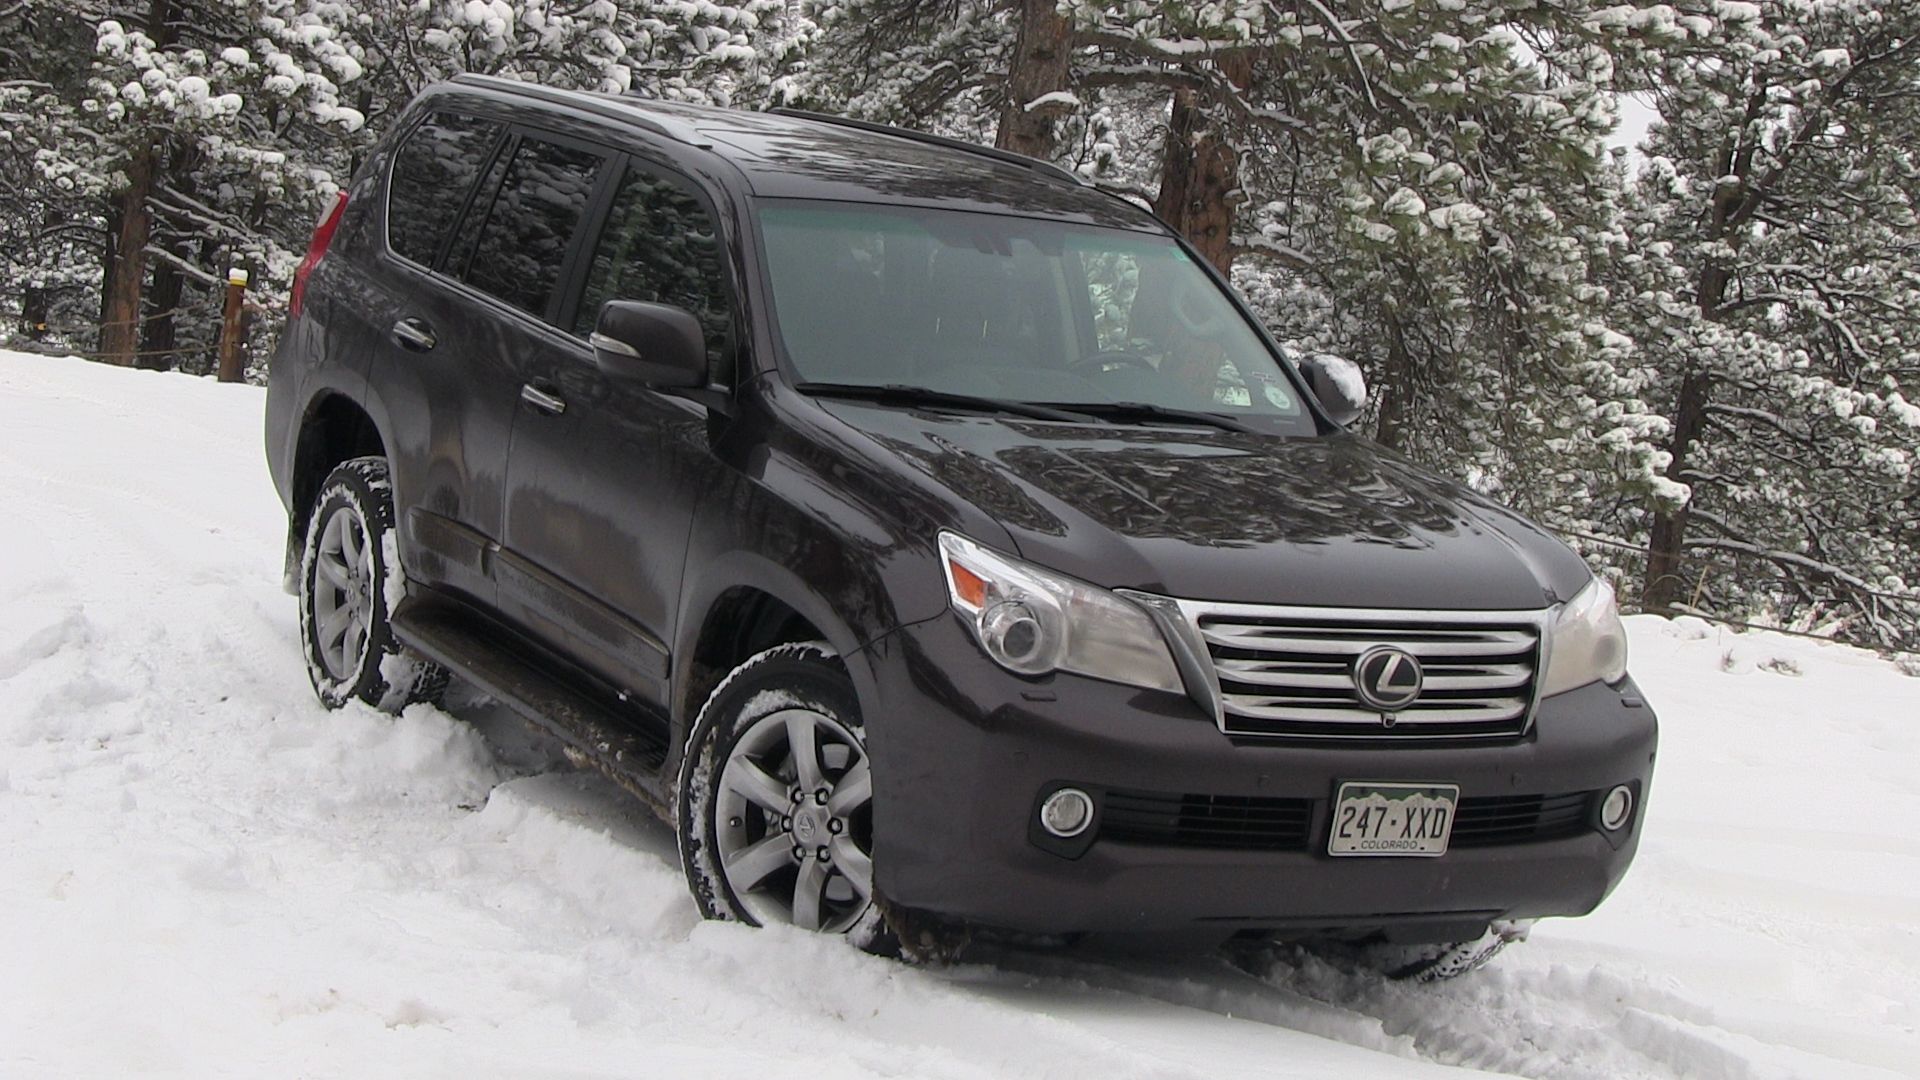 Review: 2013 Lexus GX 460 - Can Anything Stop this Luxury Off-Roader